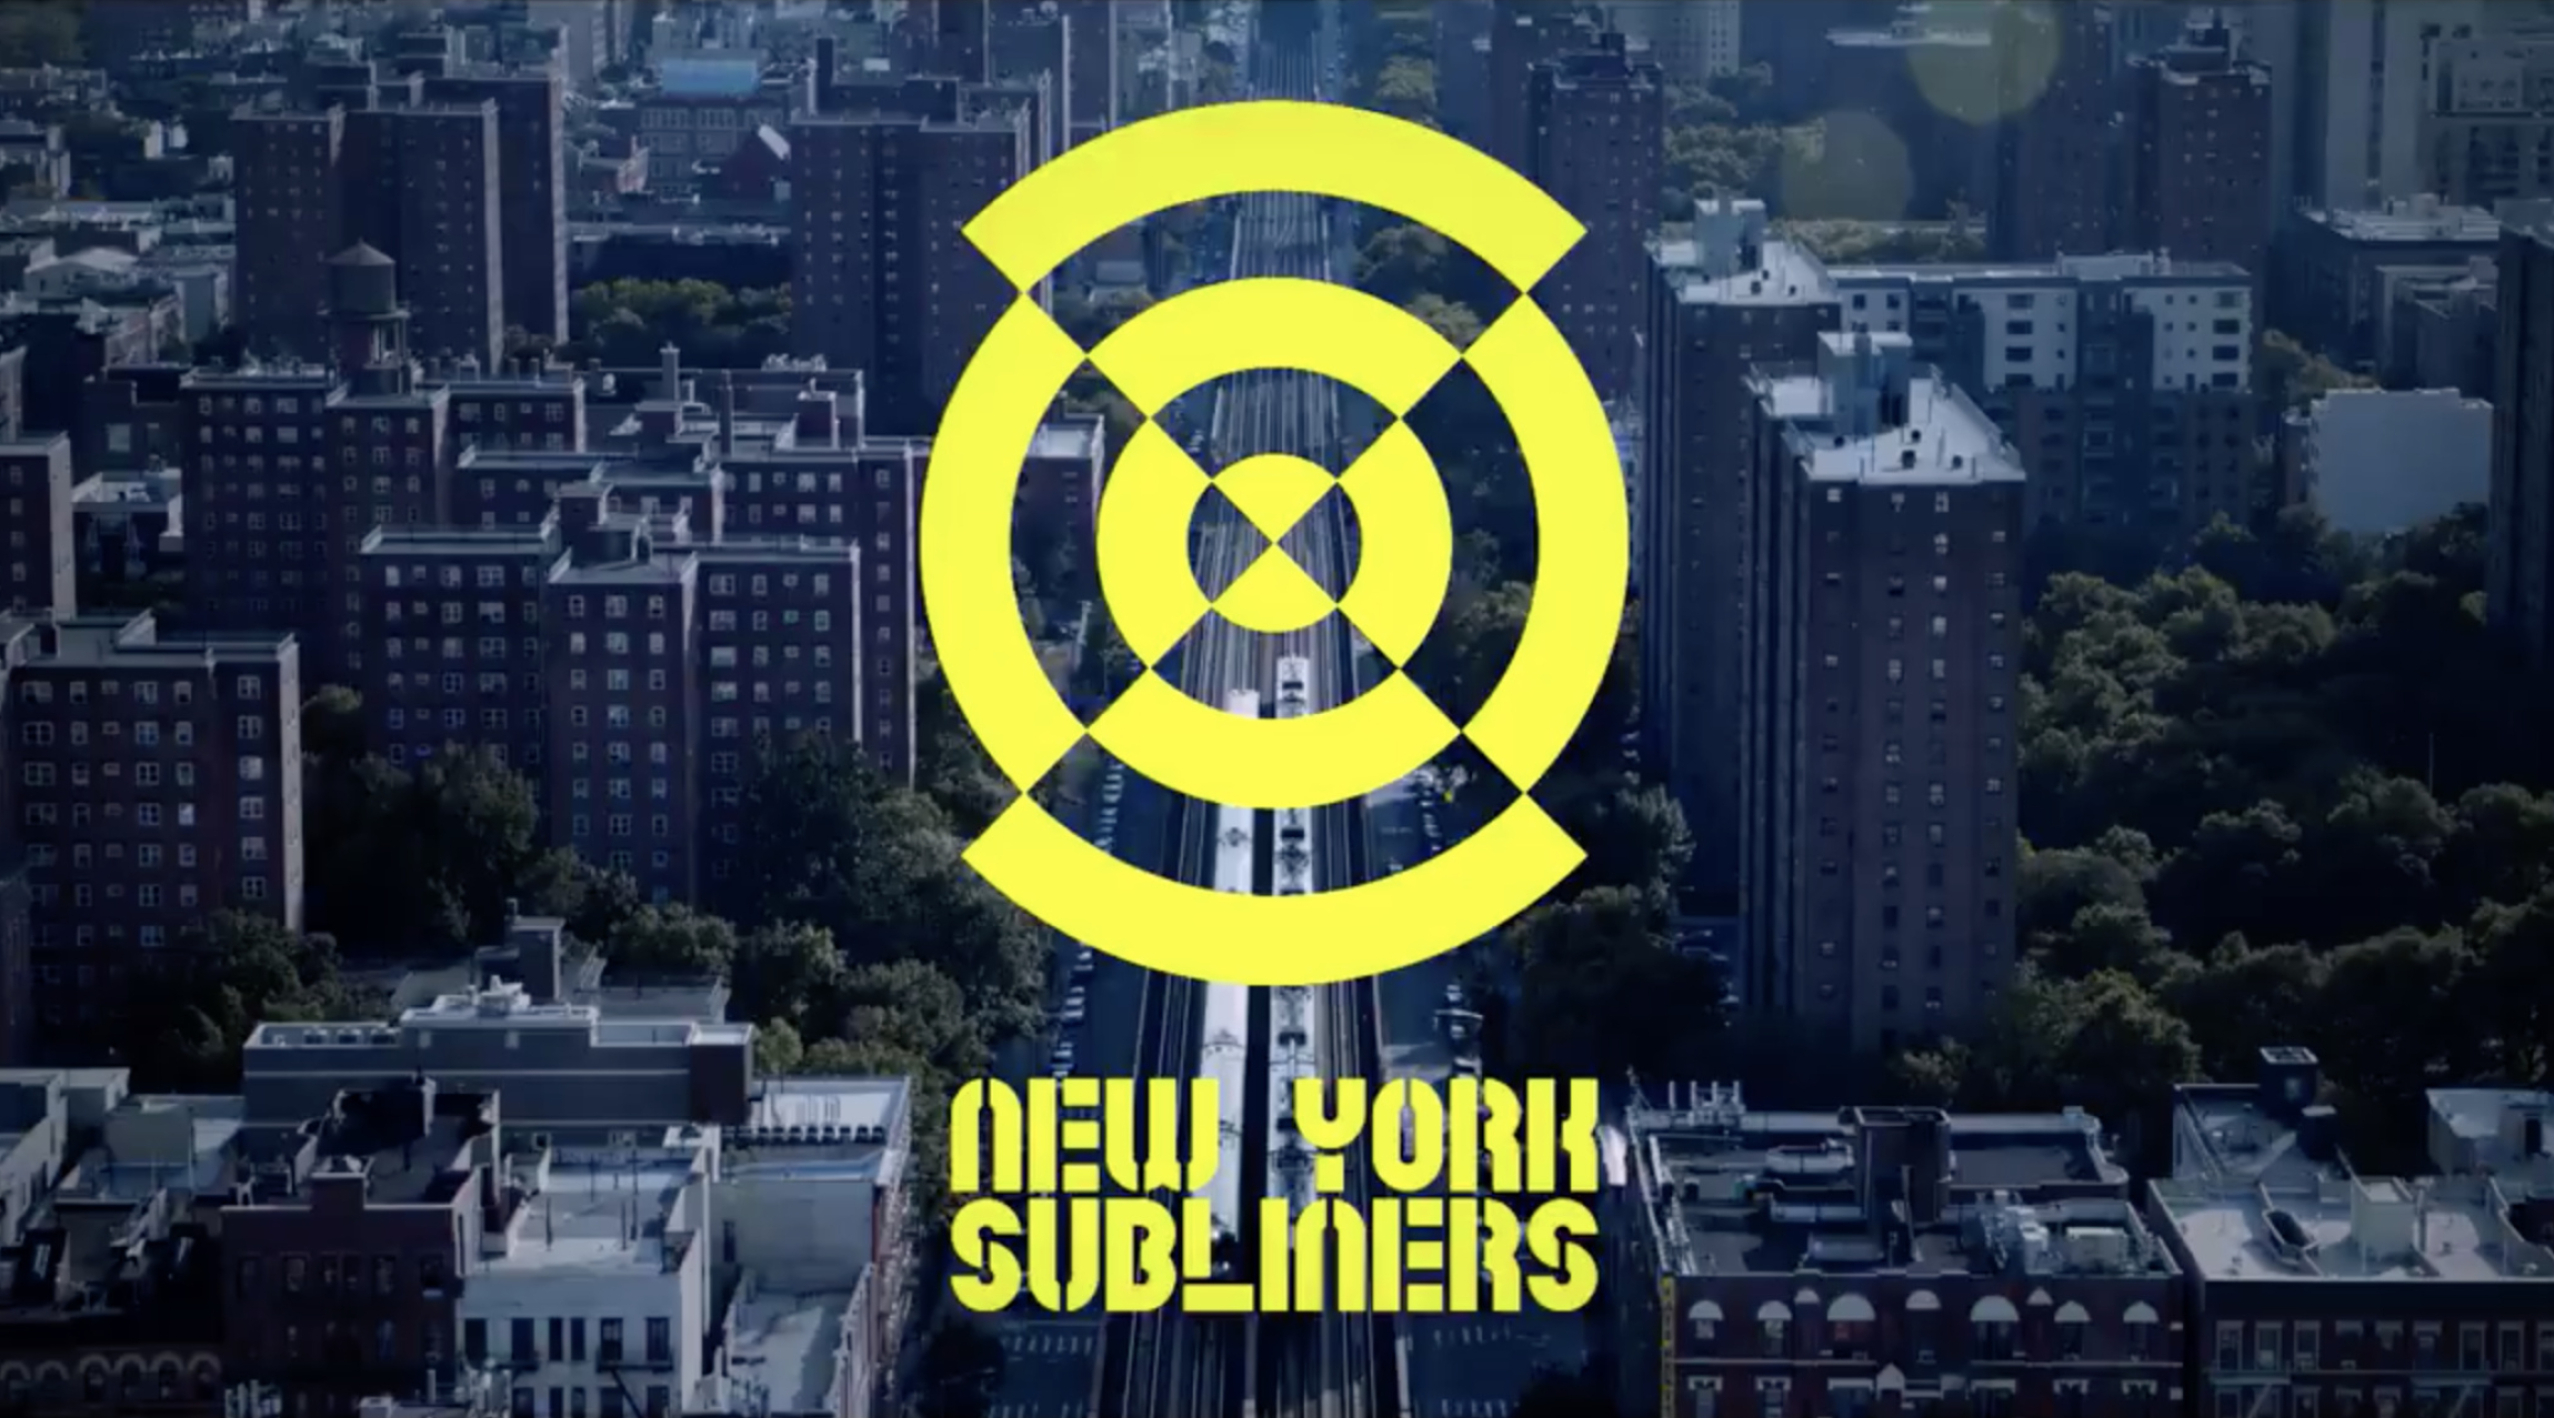 New York Subliners, Charlie Intel, Call of Duty news, Gaming updates, 2560x1420 HD Desktop